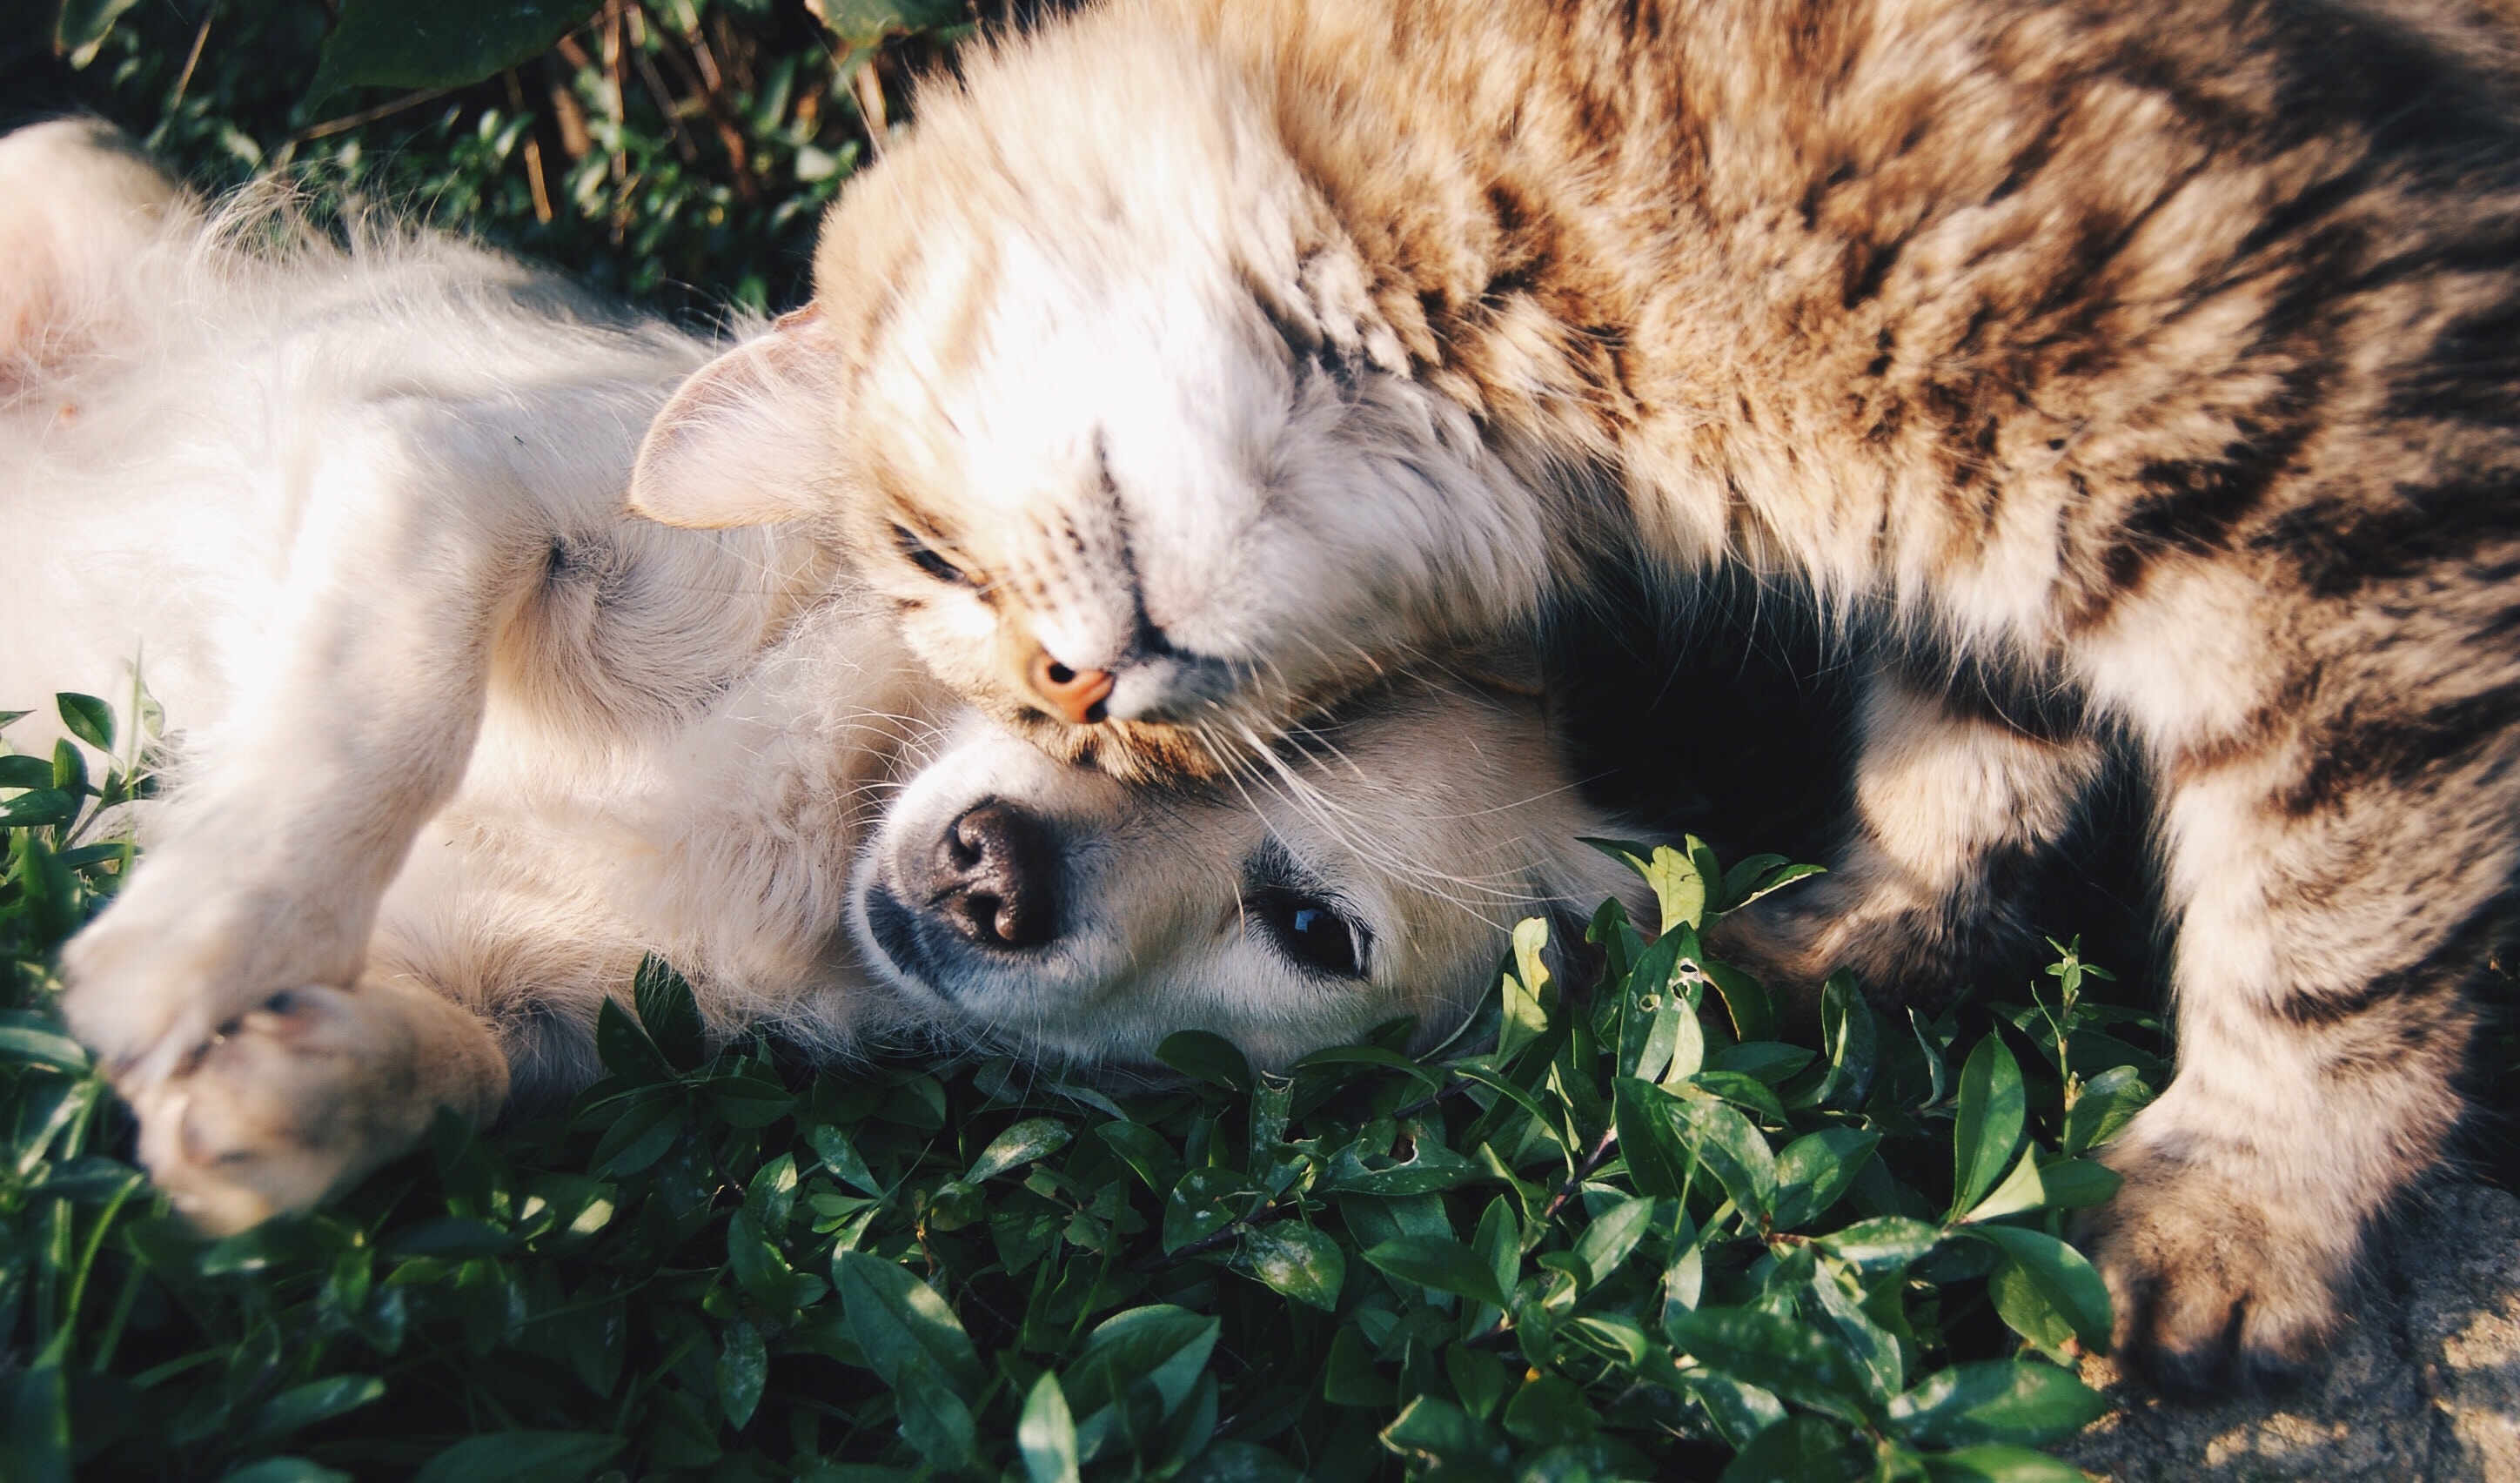 Integrative treatments for pets include acupuncture, laser therapy, herbal medicine, and food therapy.